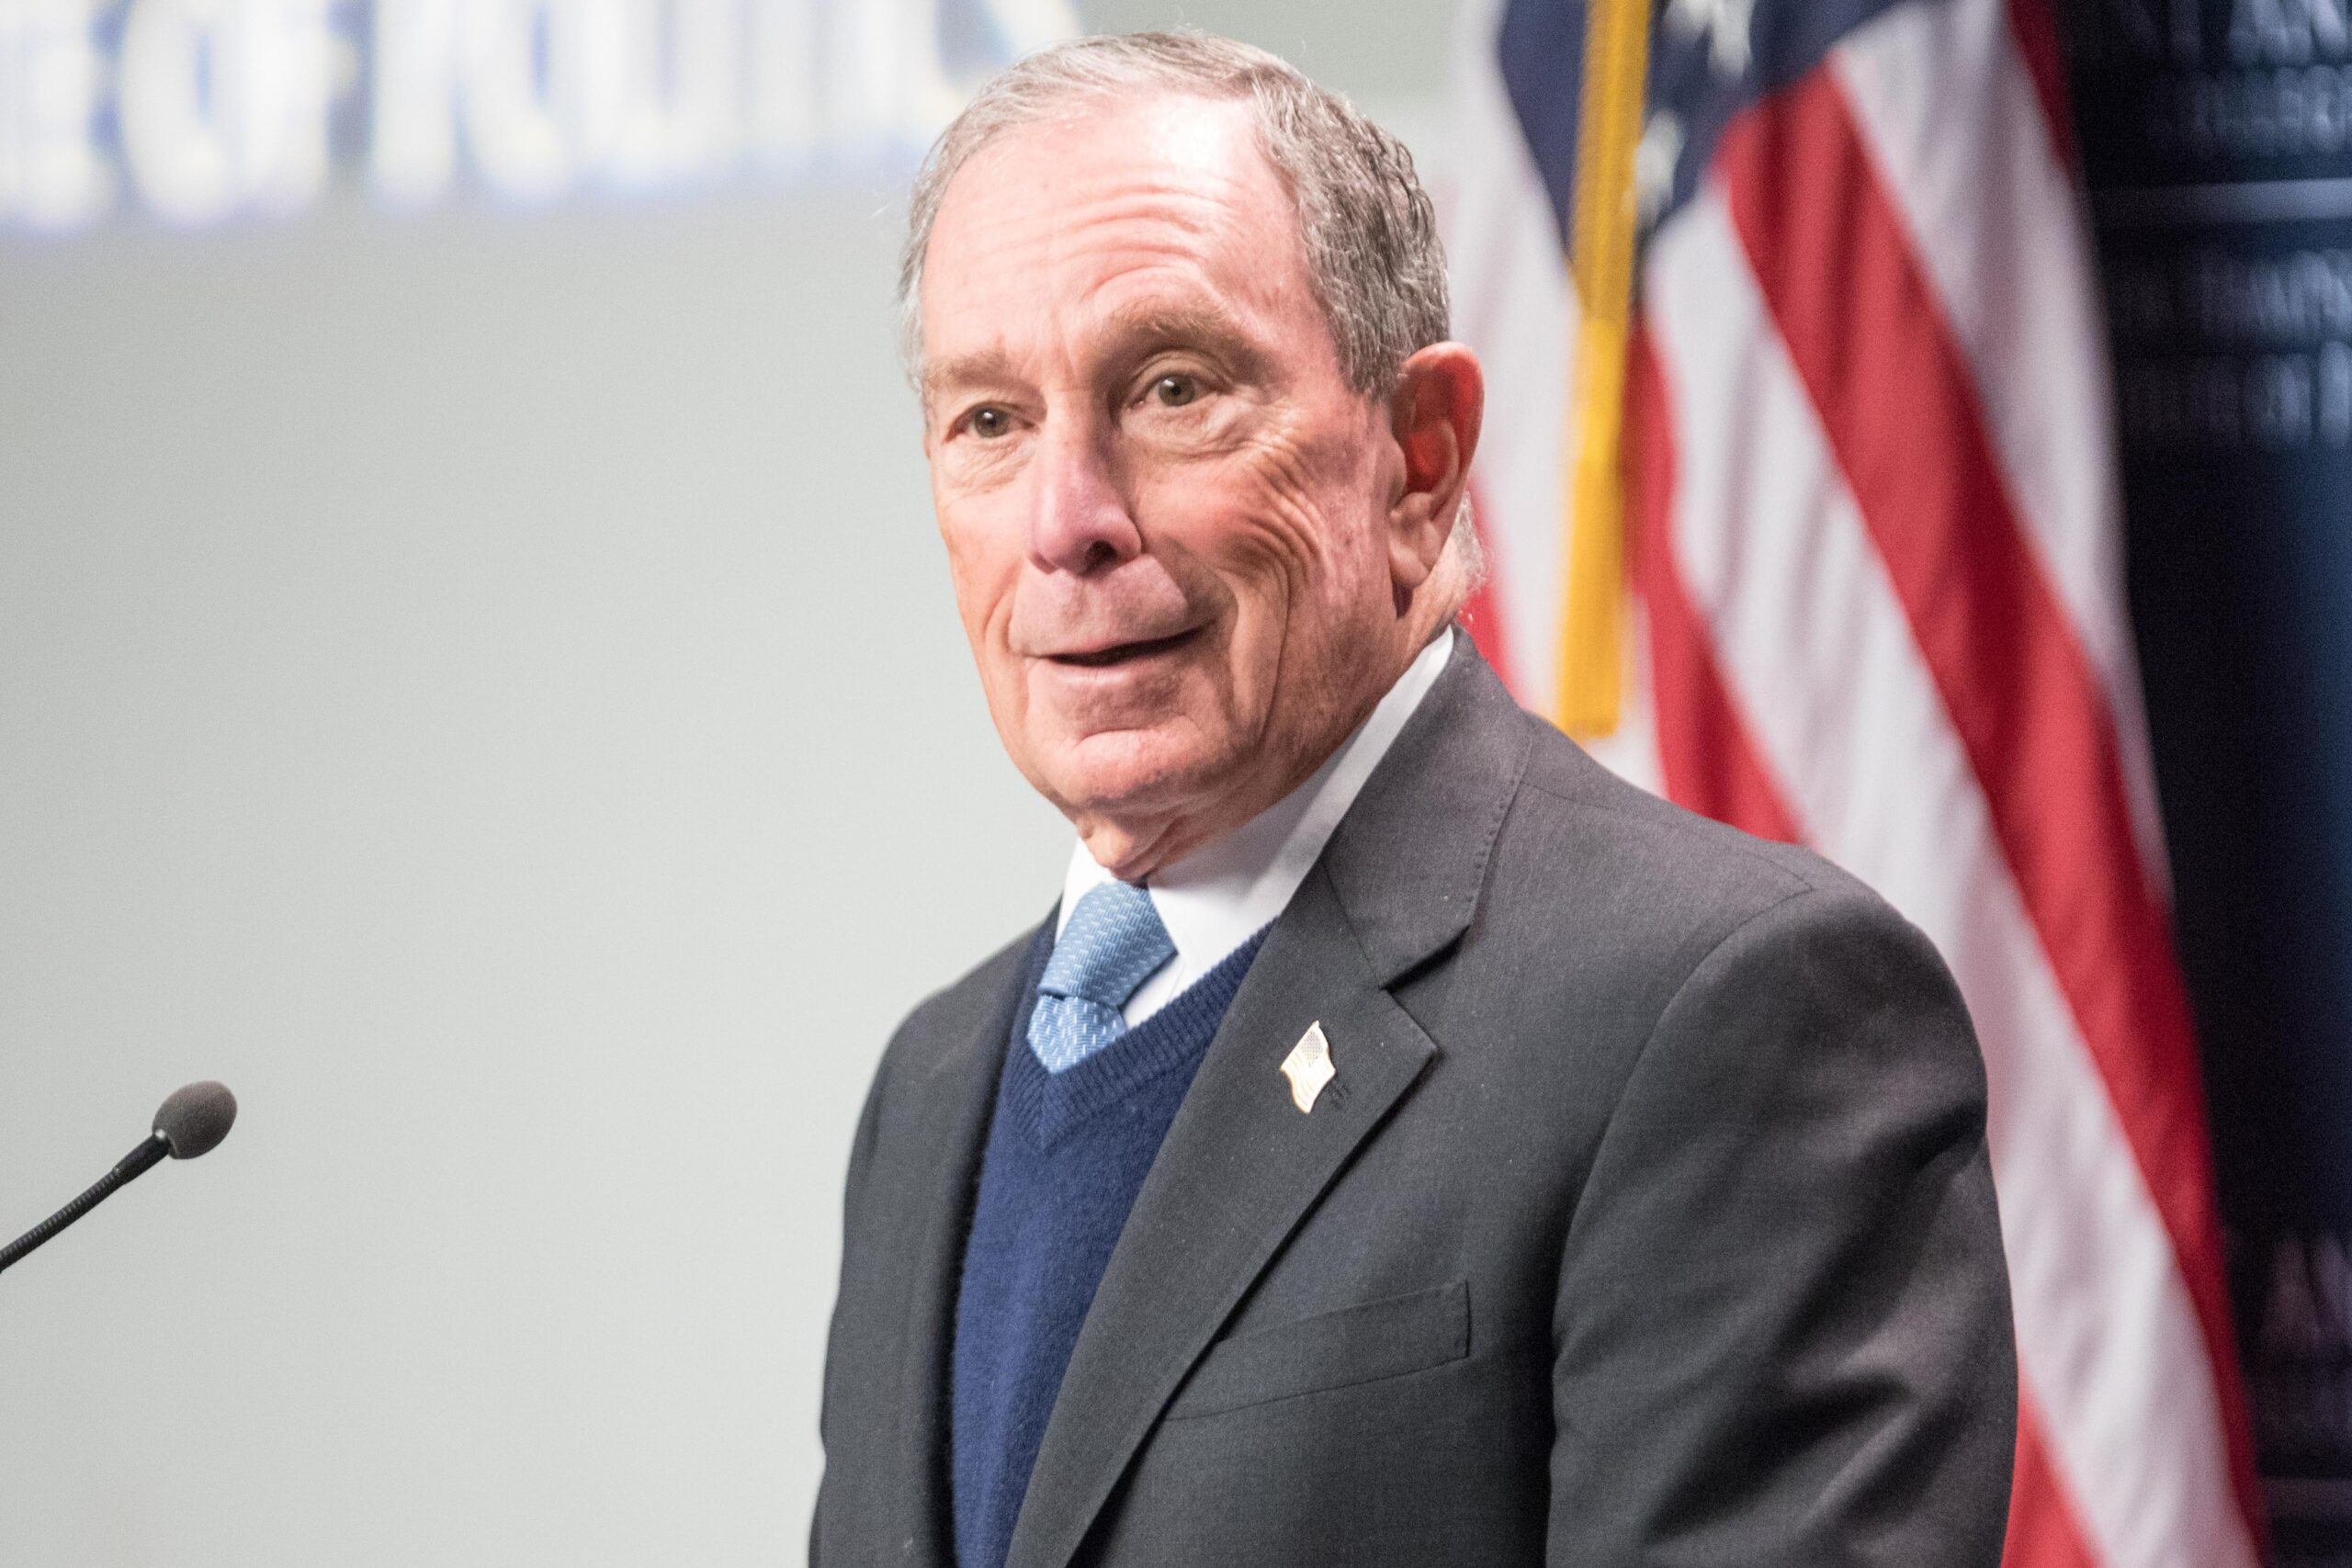 Trump Lashes Out at ‘Mini Mike Bloomberg’ After Fox News Airs Former New York Mayor’s Ad